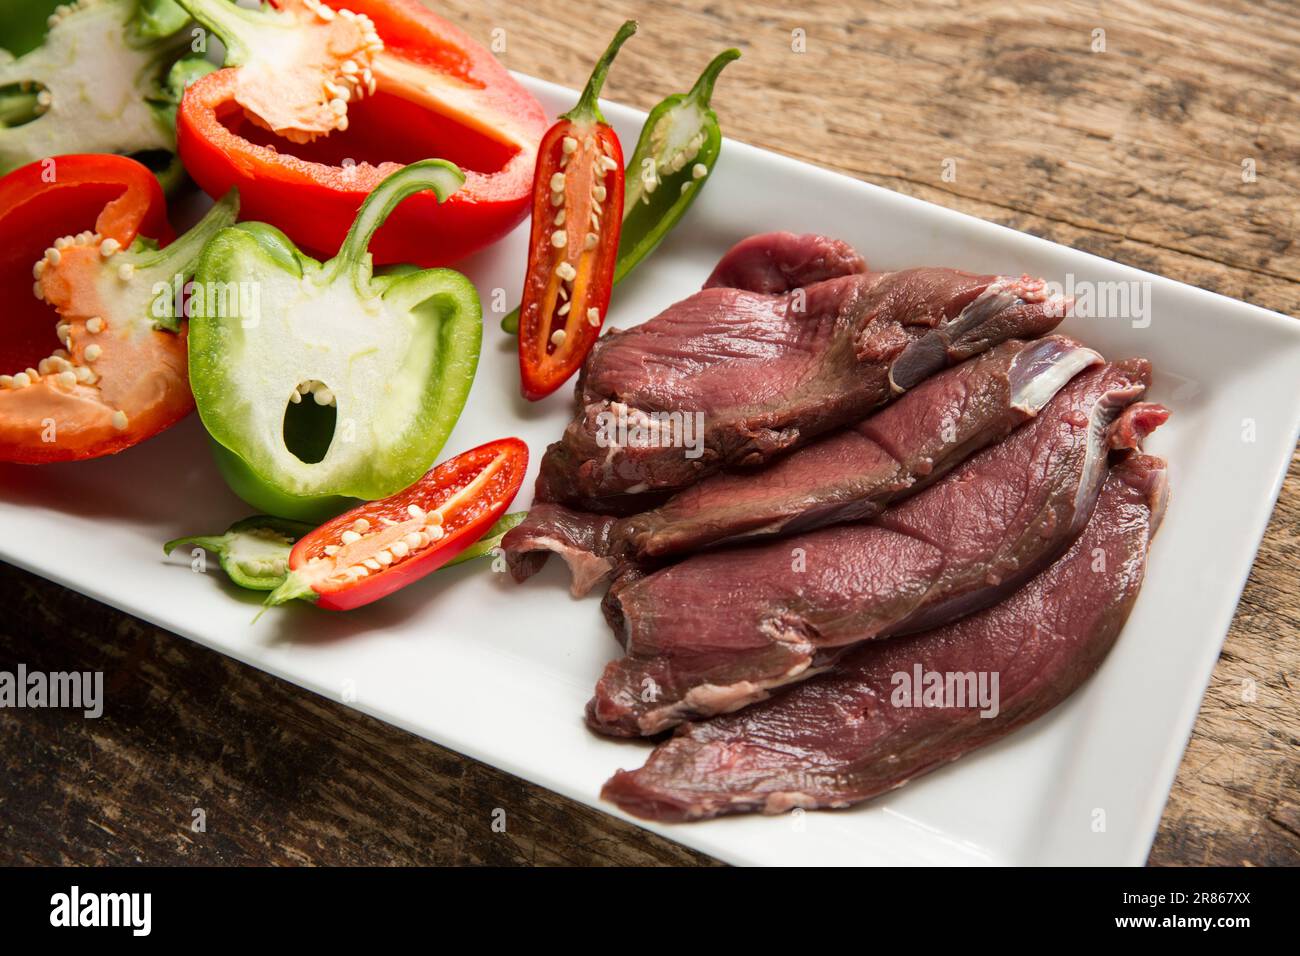 Raw venison slices from a wild roe deer, Capreolus capreolus, that are being prepared to be homecooked in a black bean sauce. England UK GB Stock Photo